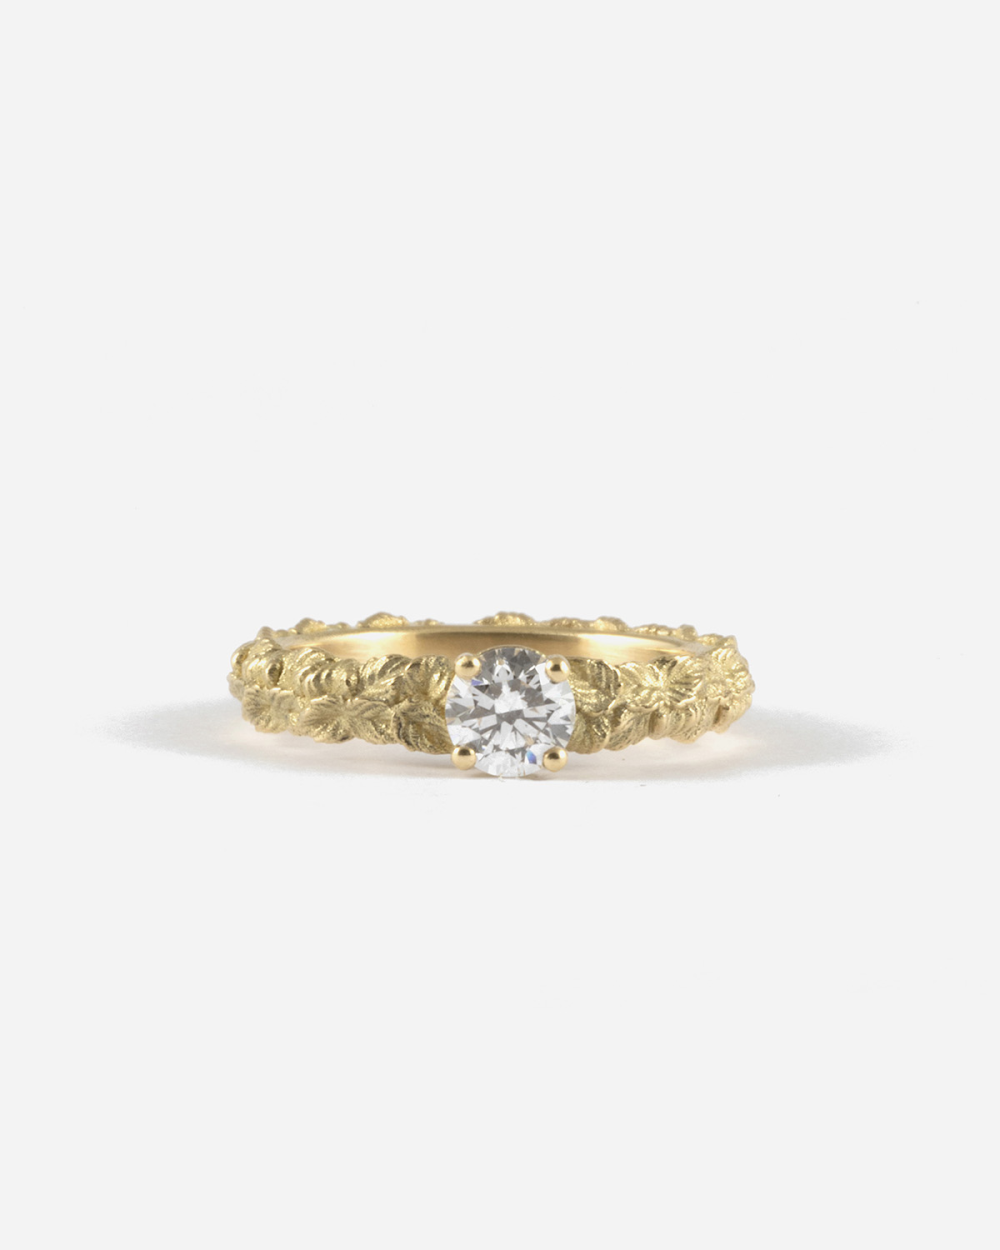 GOLD LEAVES SOLITAIRE ENGAGEMENT RING